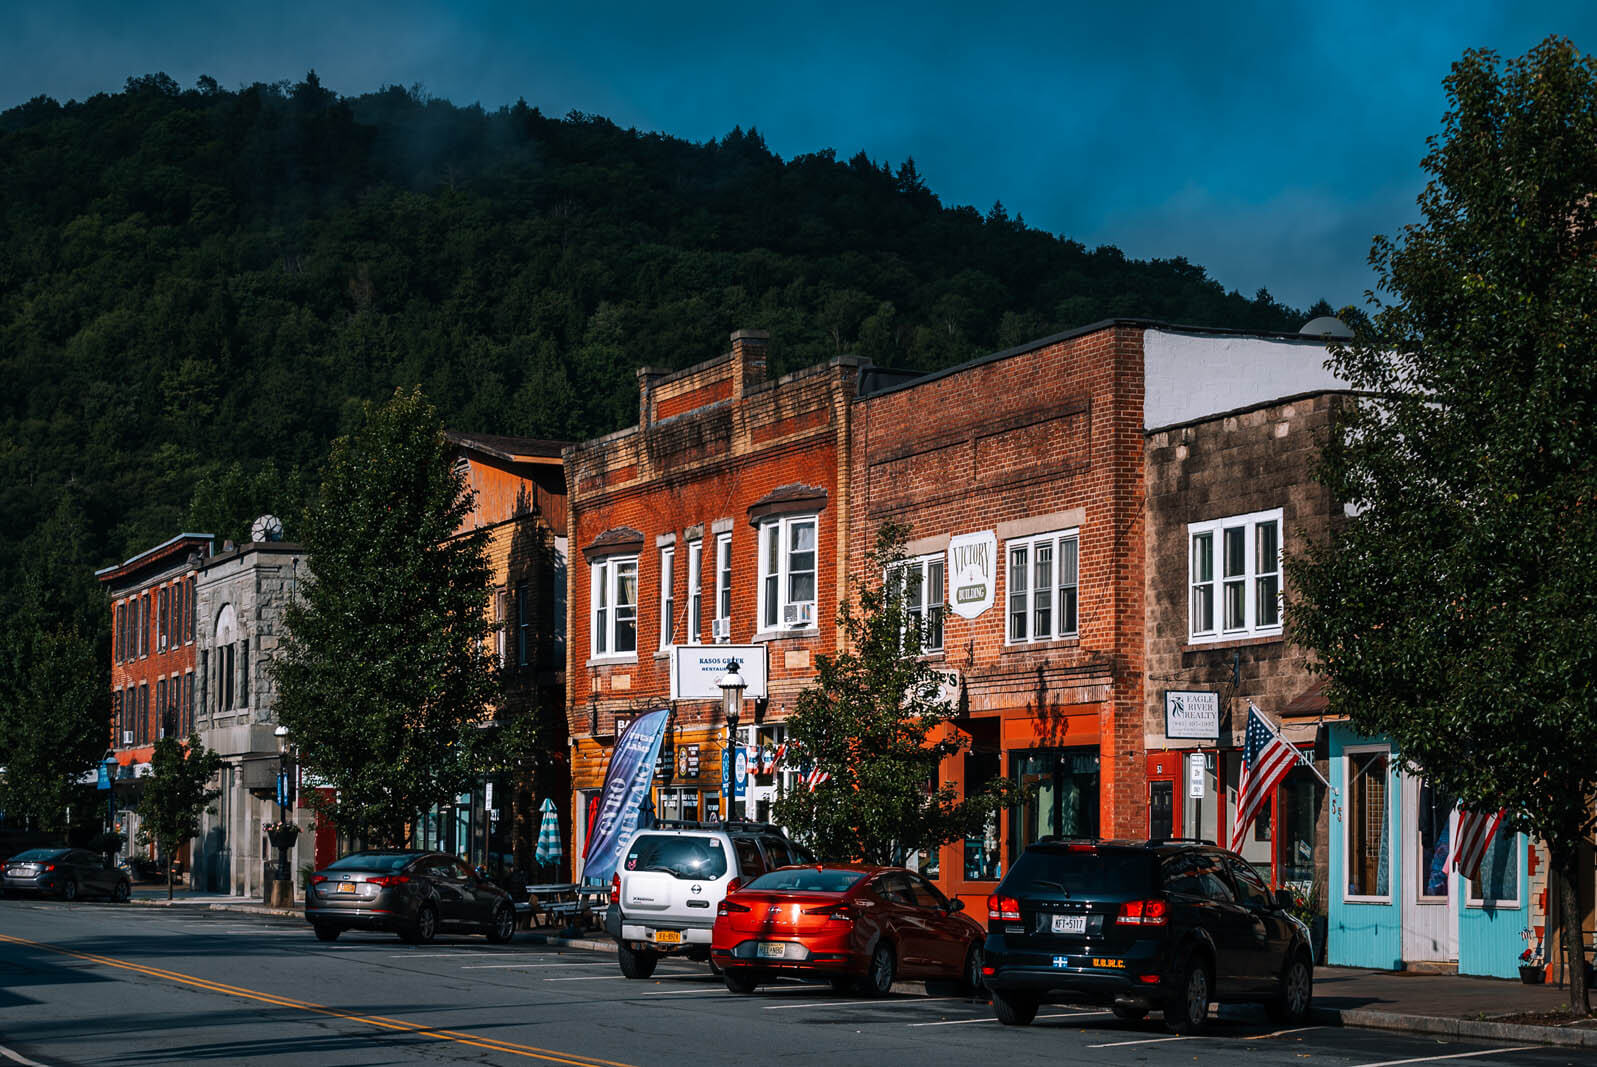 Downtown Roscoe New York in the Catskills